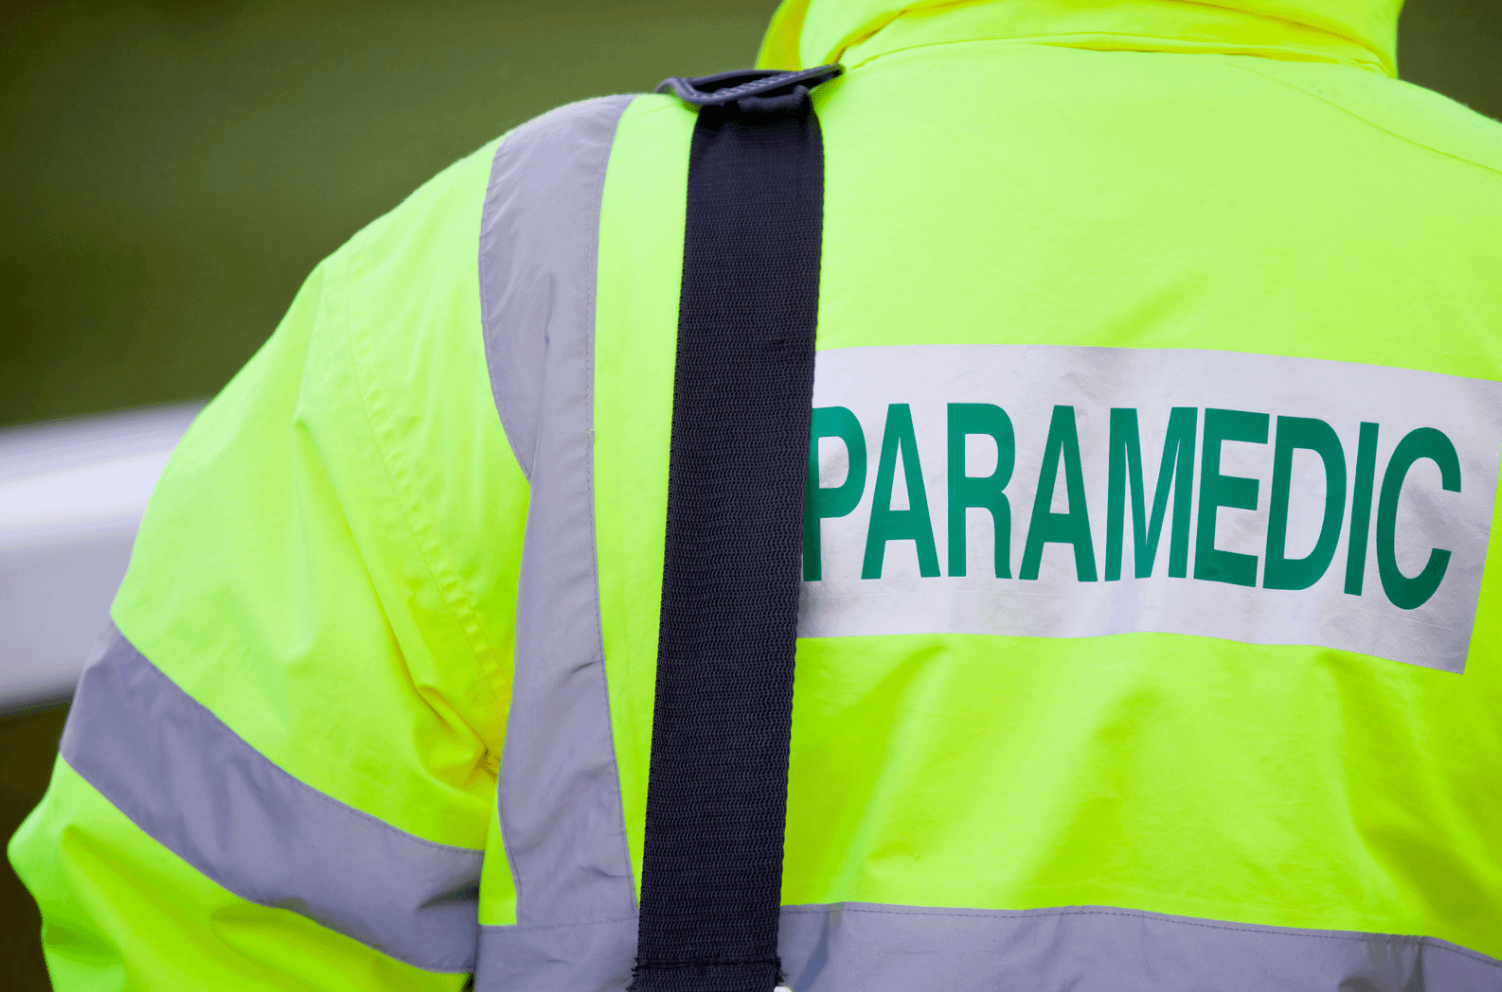 Technician to Paramedic route